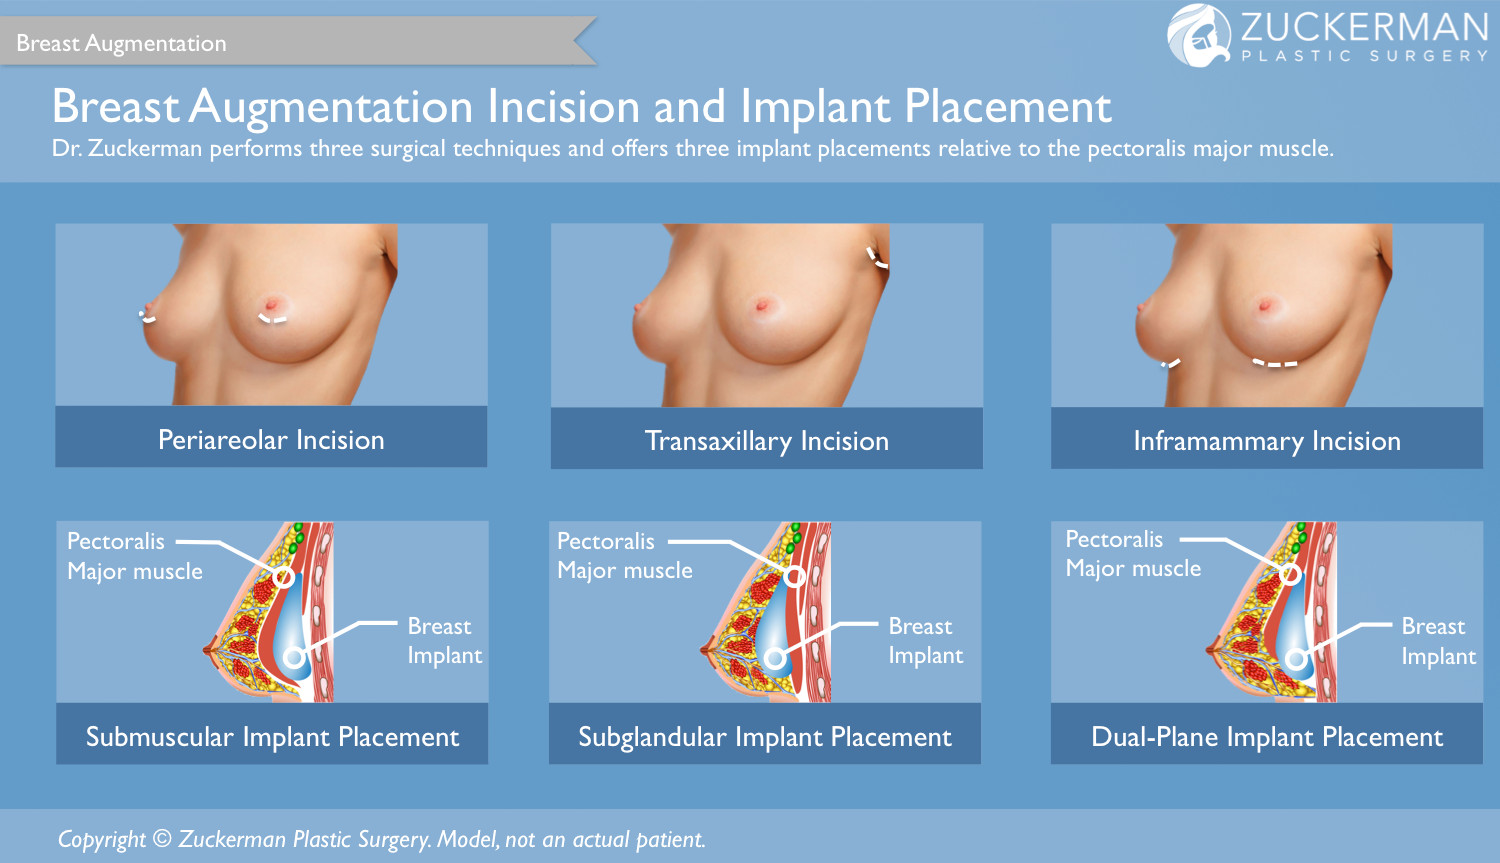 breast augmentation, incisions, implant placement, periareolar incision, transaxillary incision, inframammary incision, submuscular, subglandular, dual plane